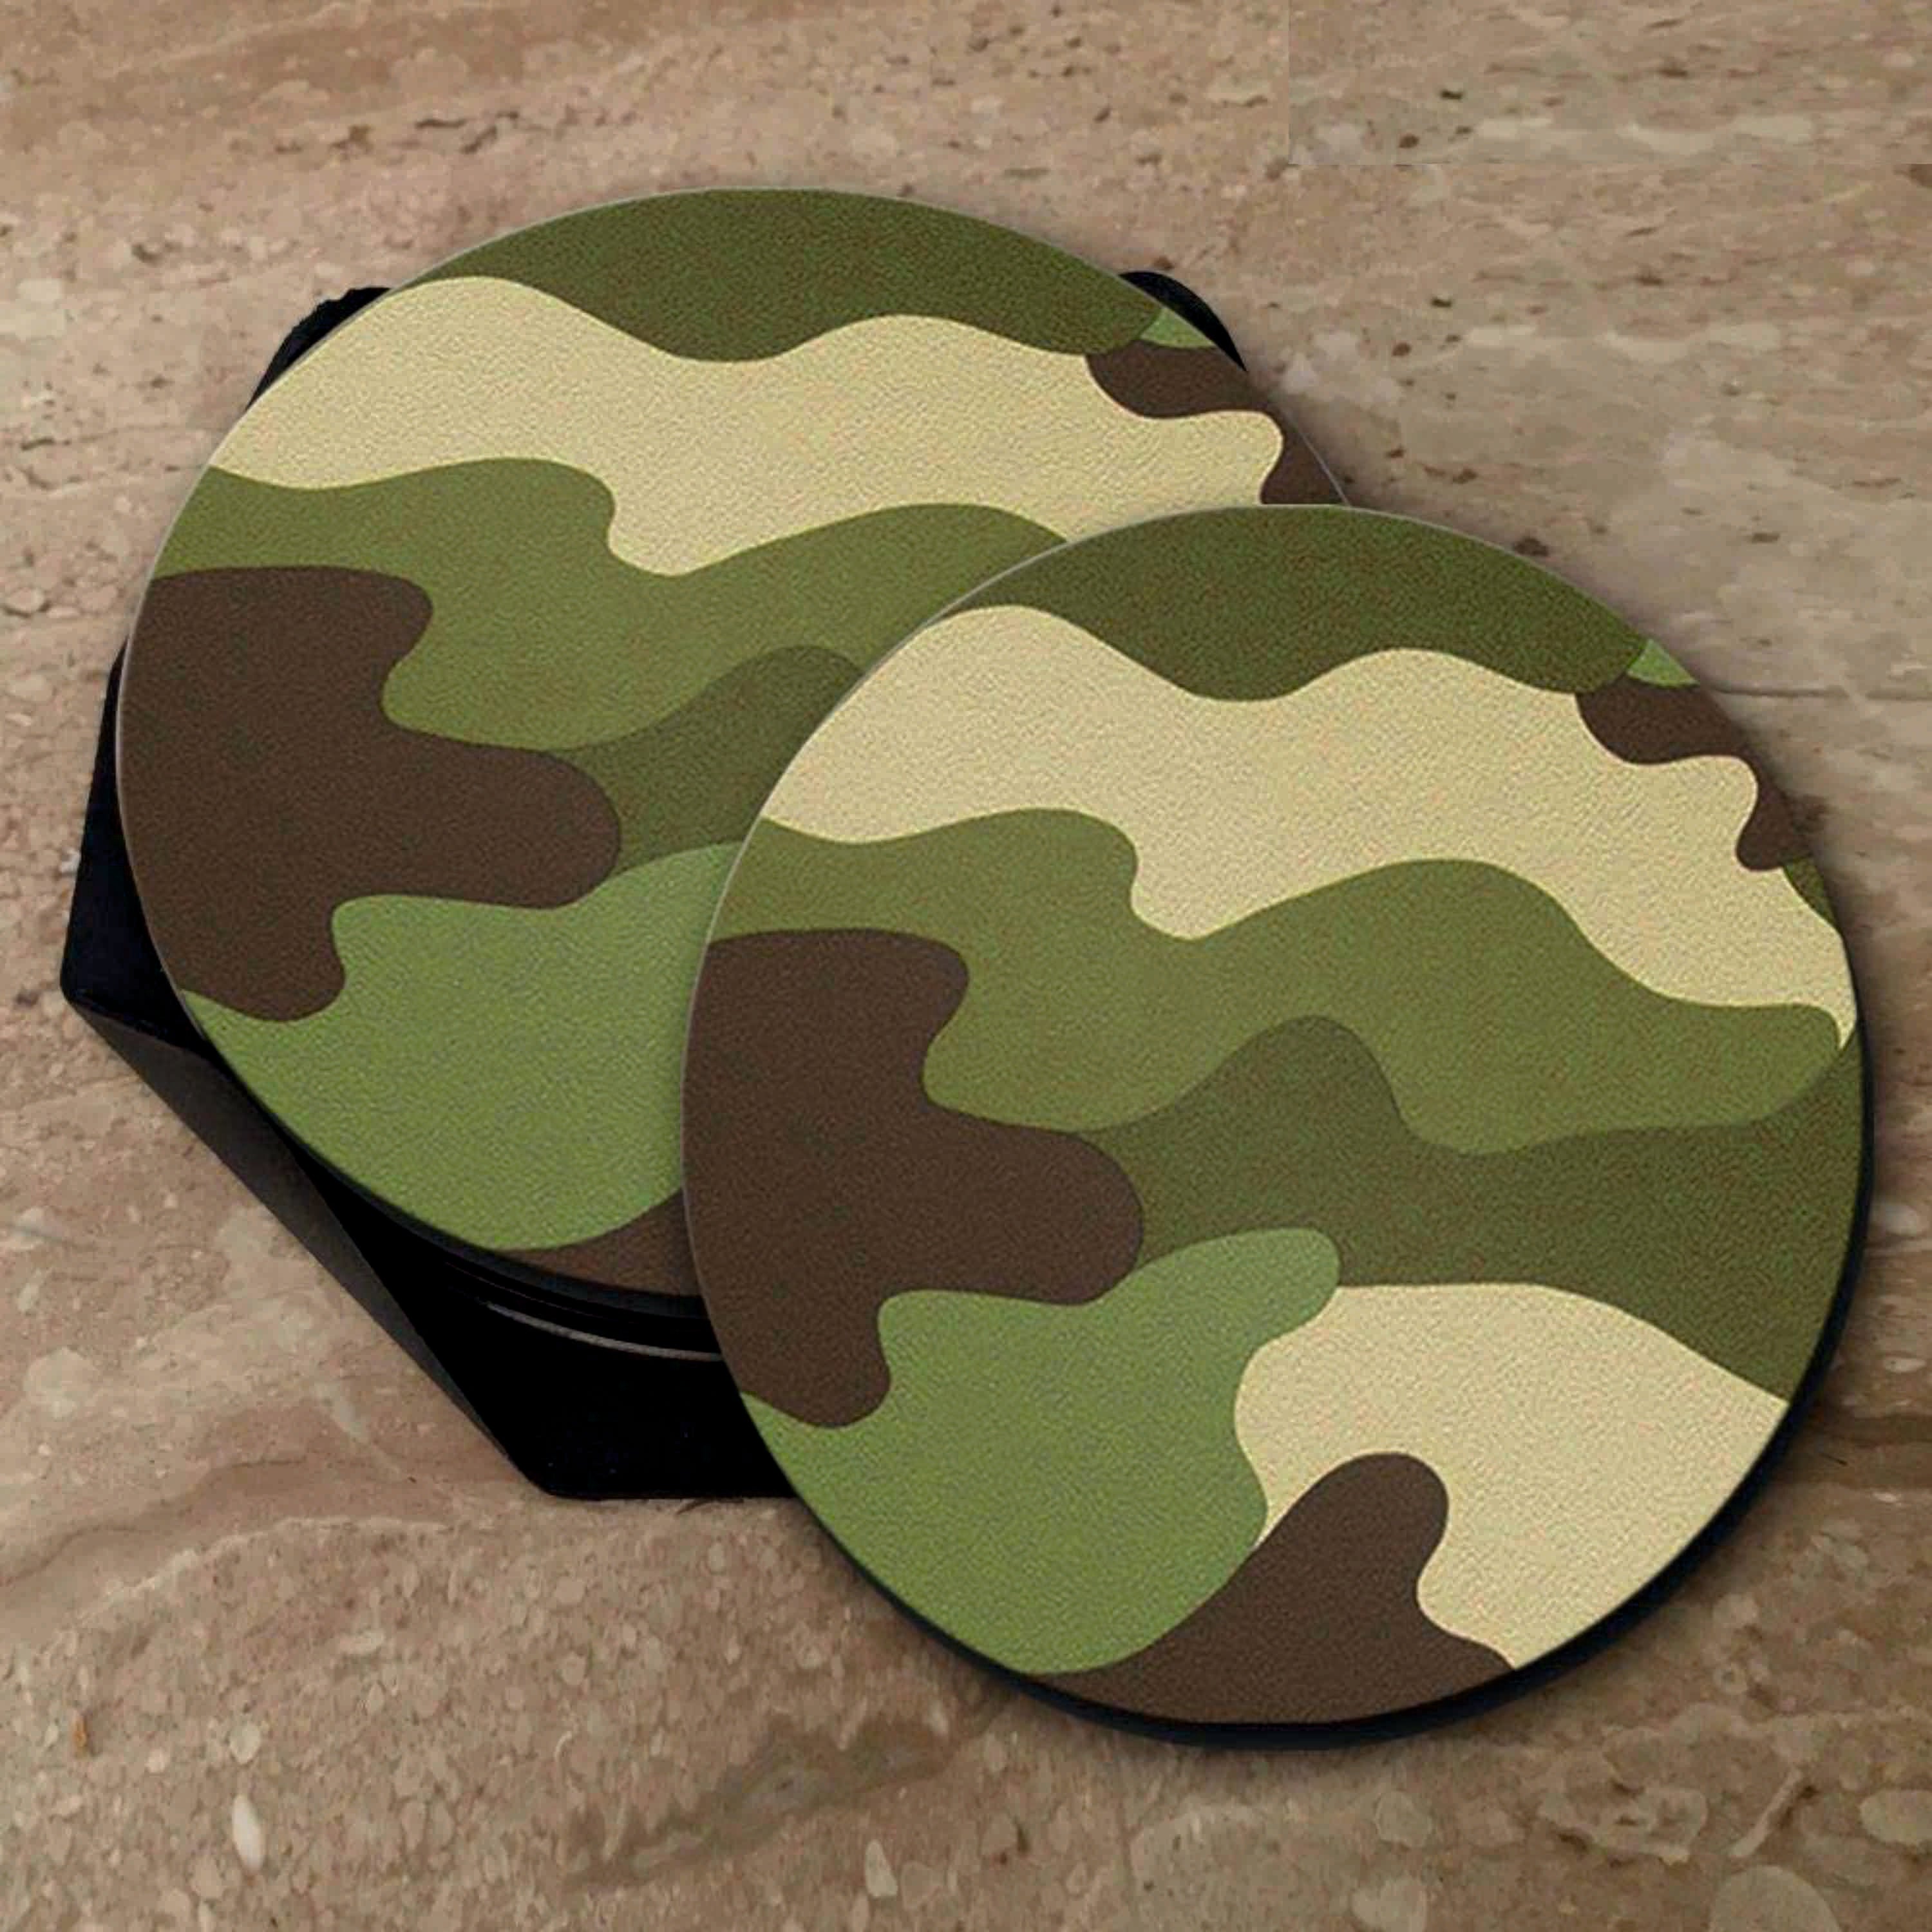 Cool Army Print - Coasters (Set of 6)